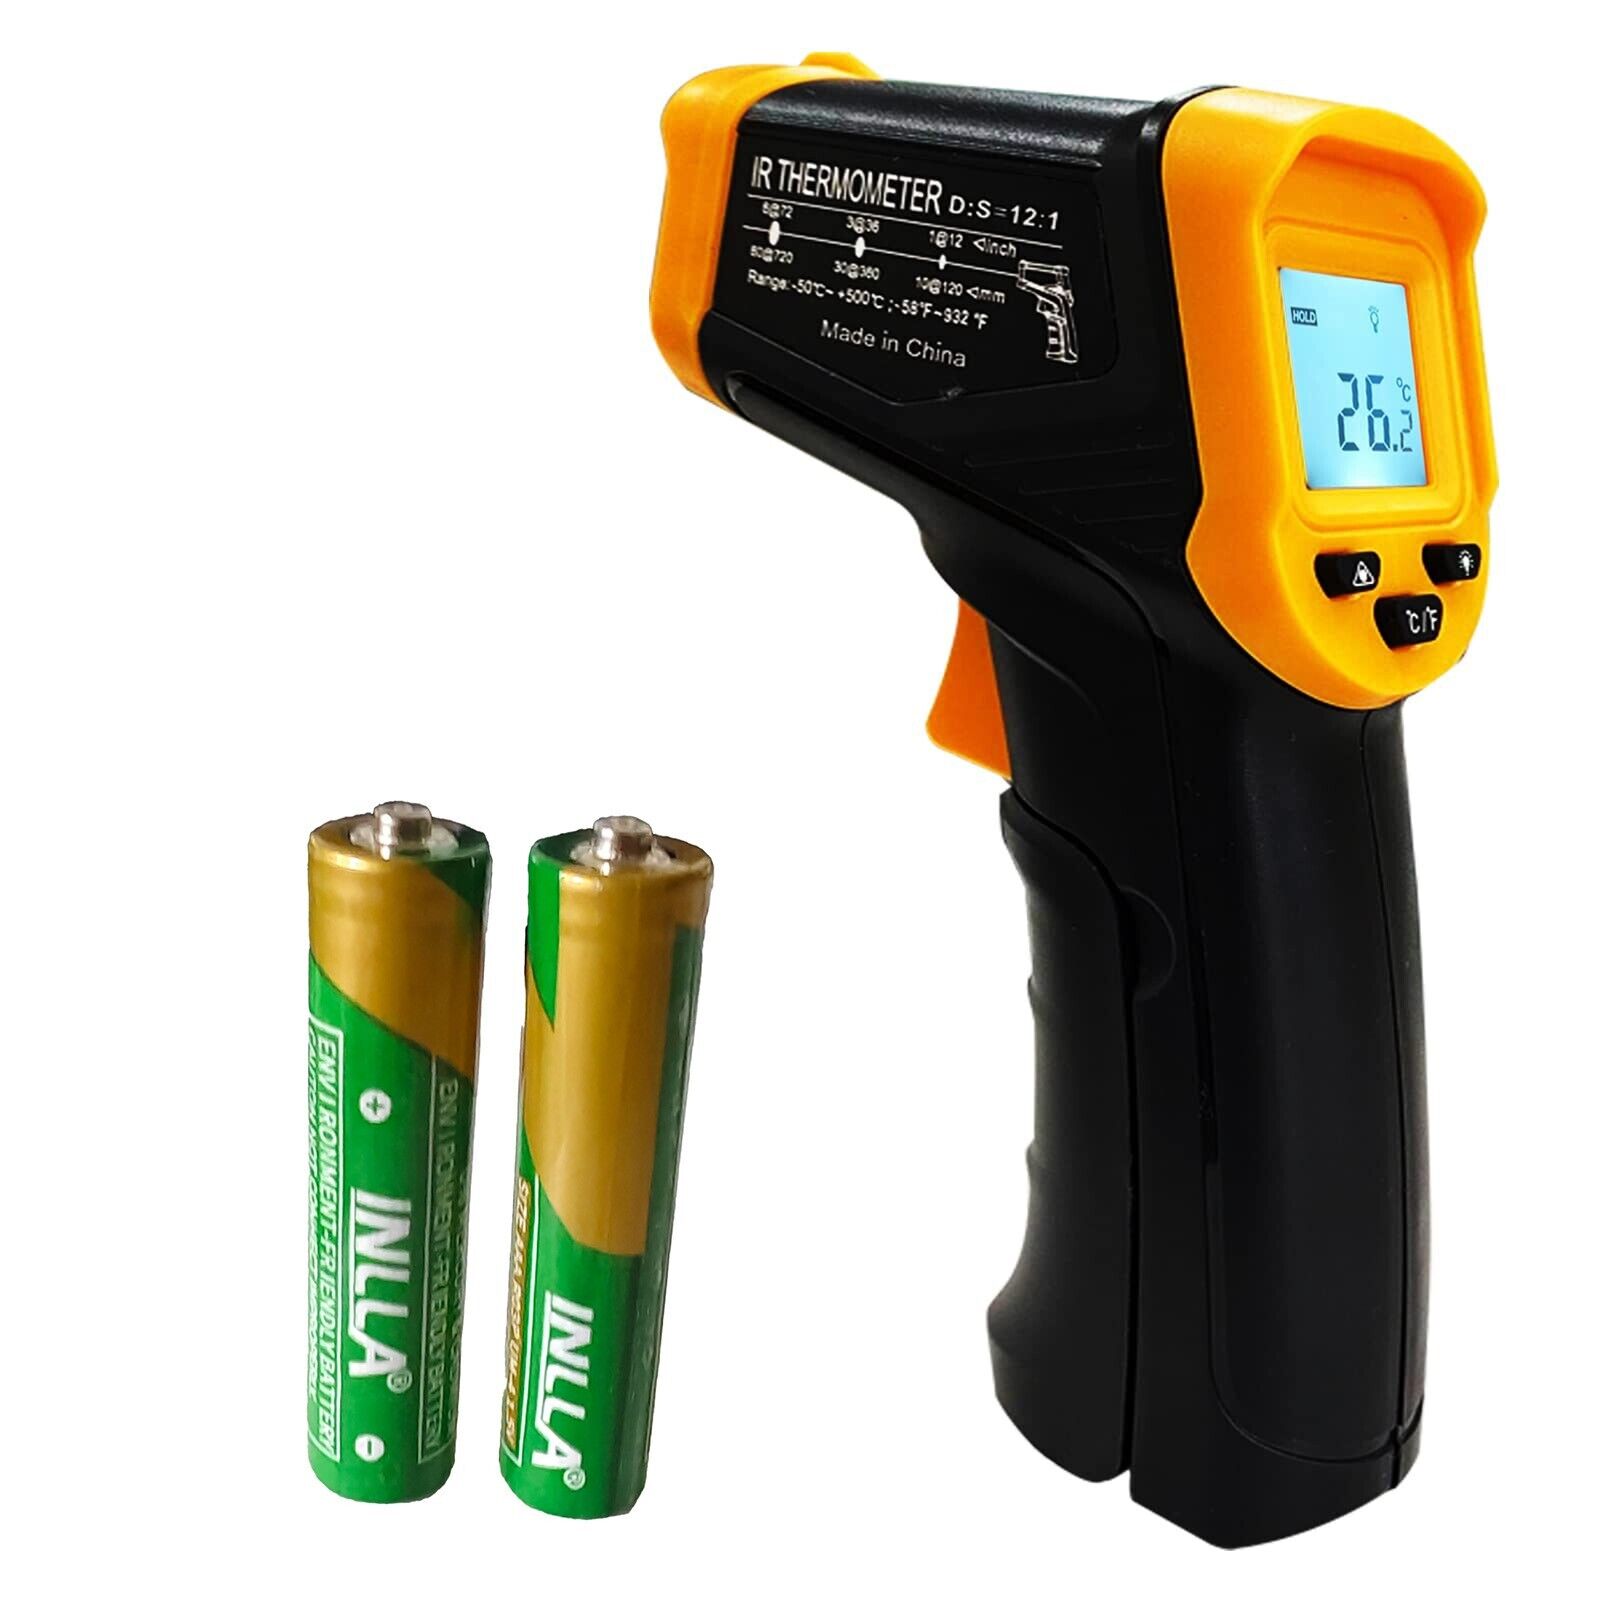 Digital Infrared Thermometer Cooking, Ir Thermometer with Backlight -58℉-932℉